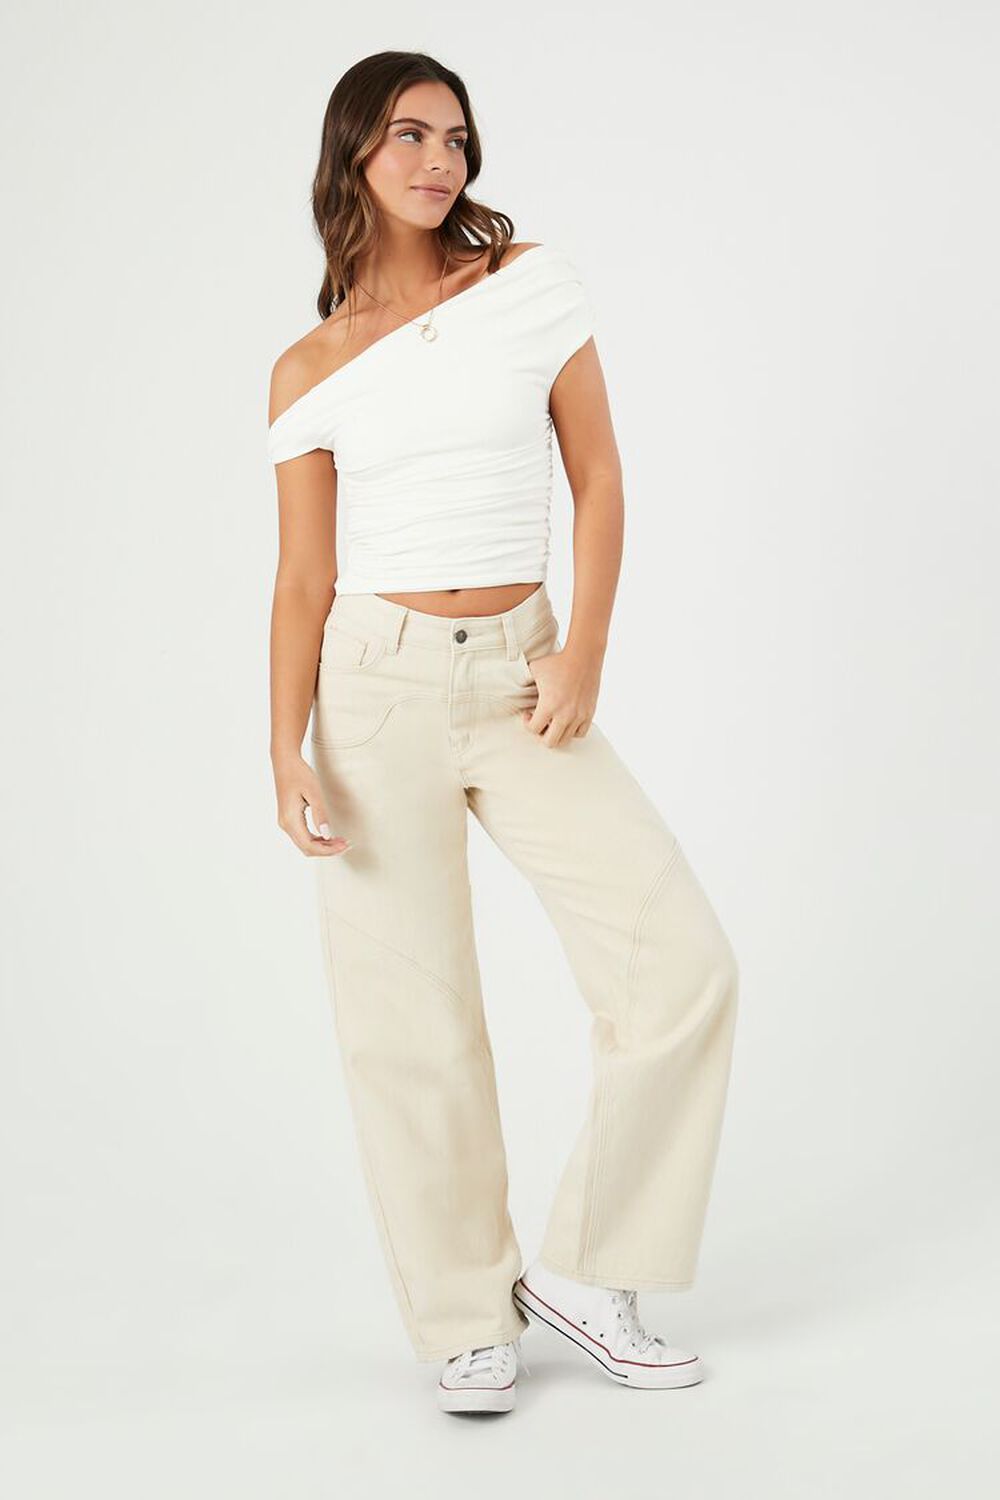 FOREVER 21 Women Nude-Coloured Solid Crop Top